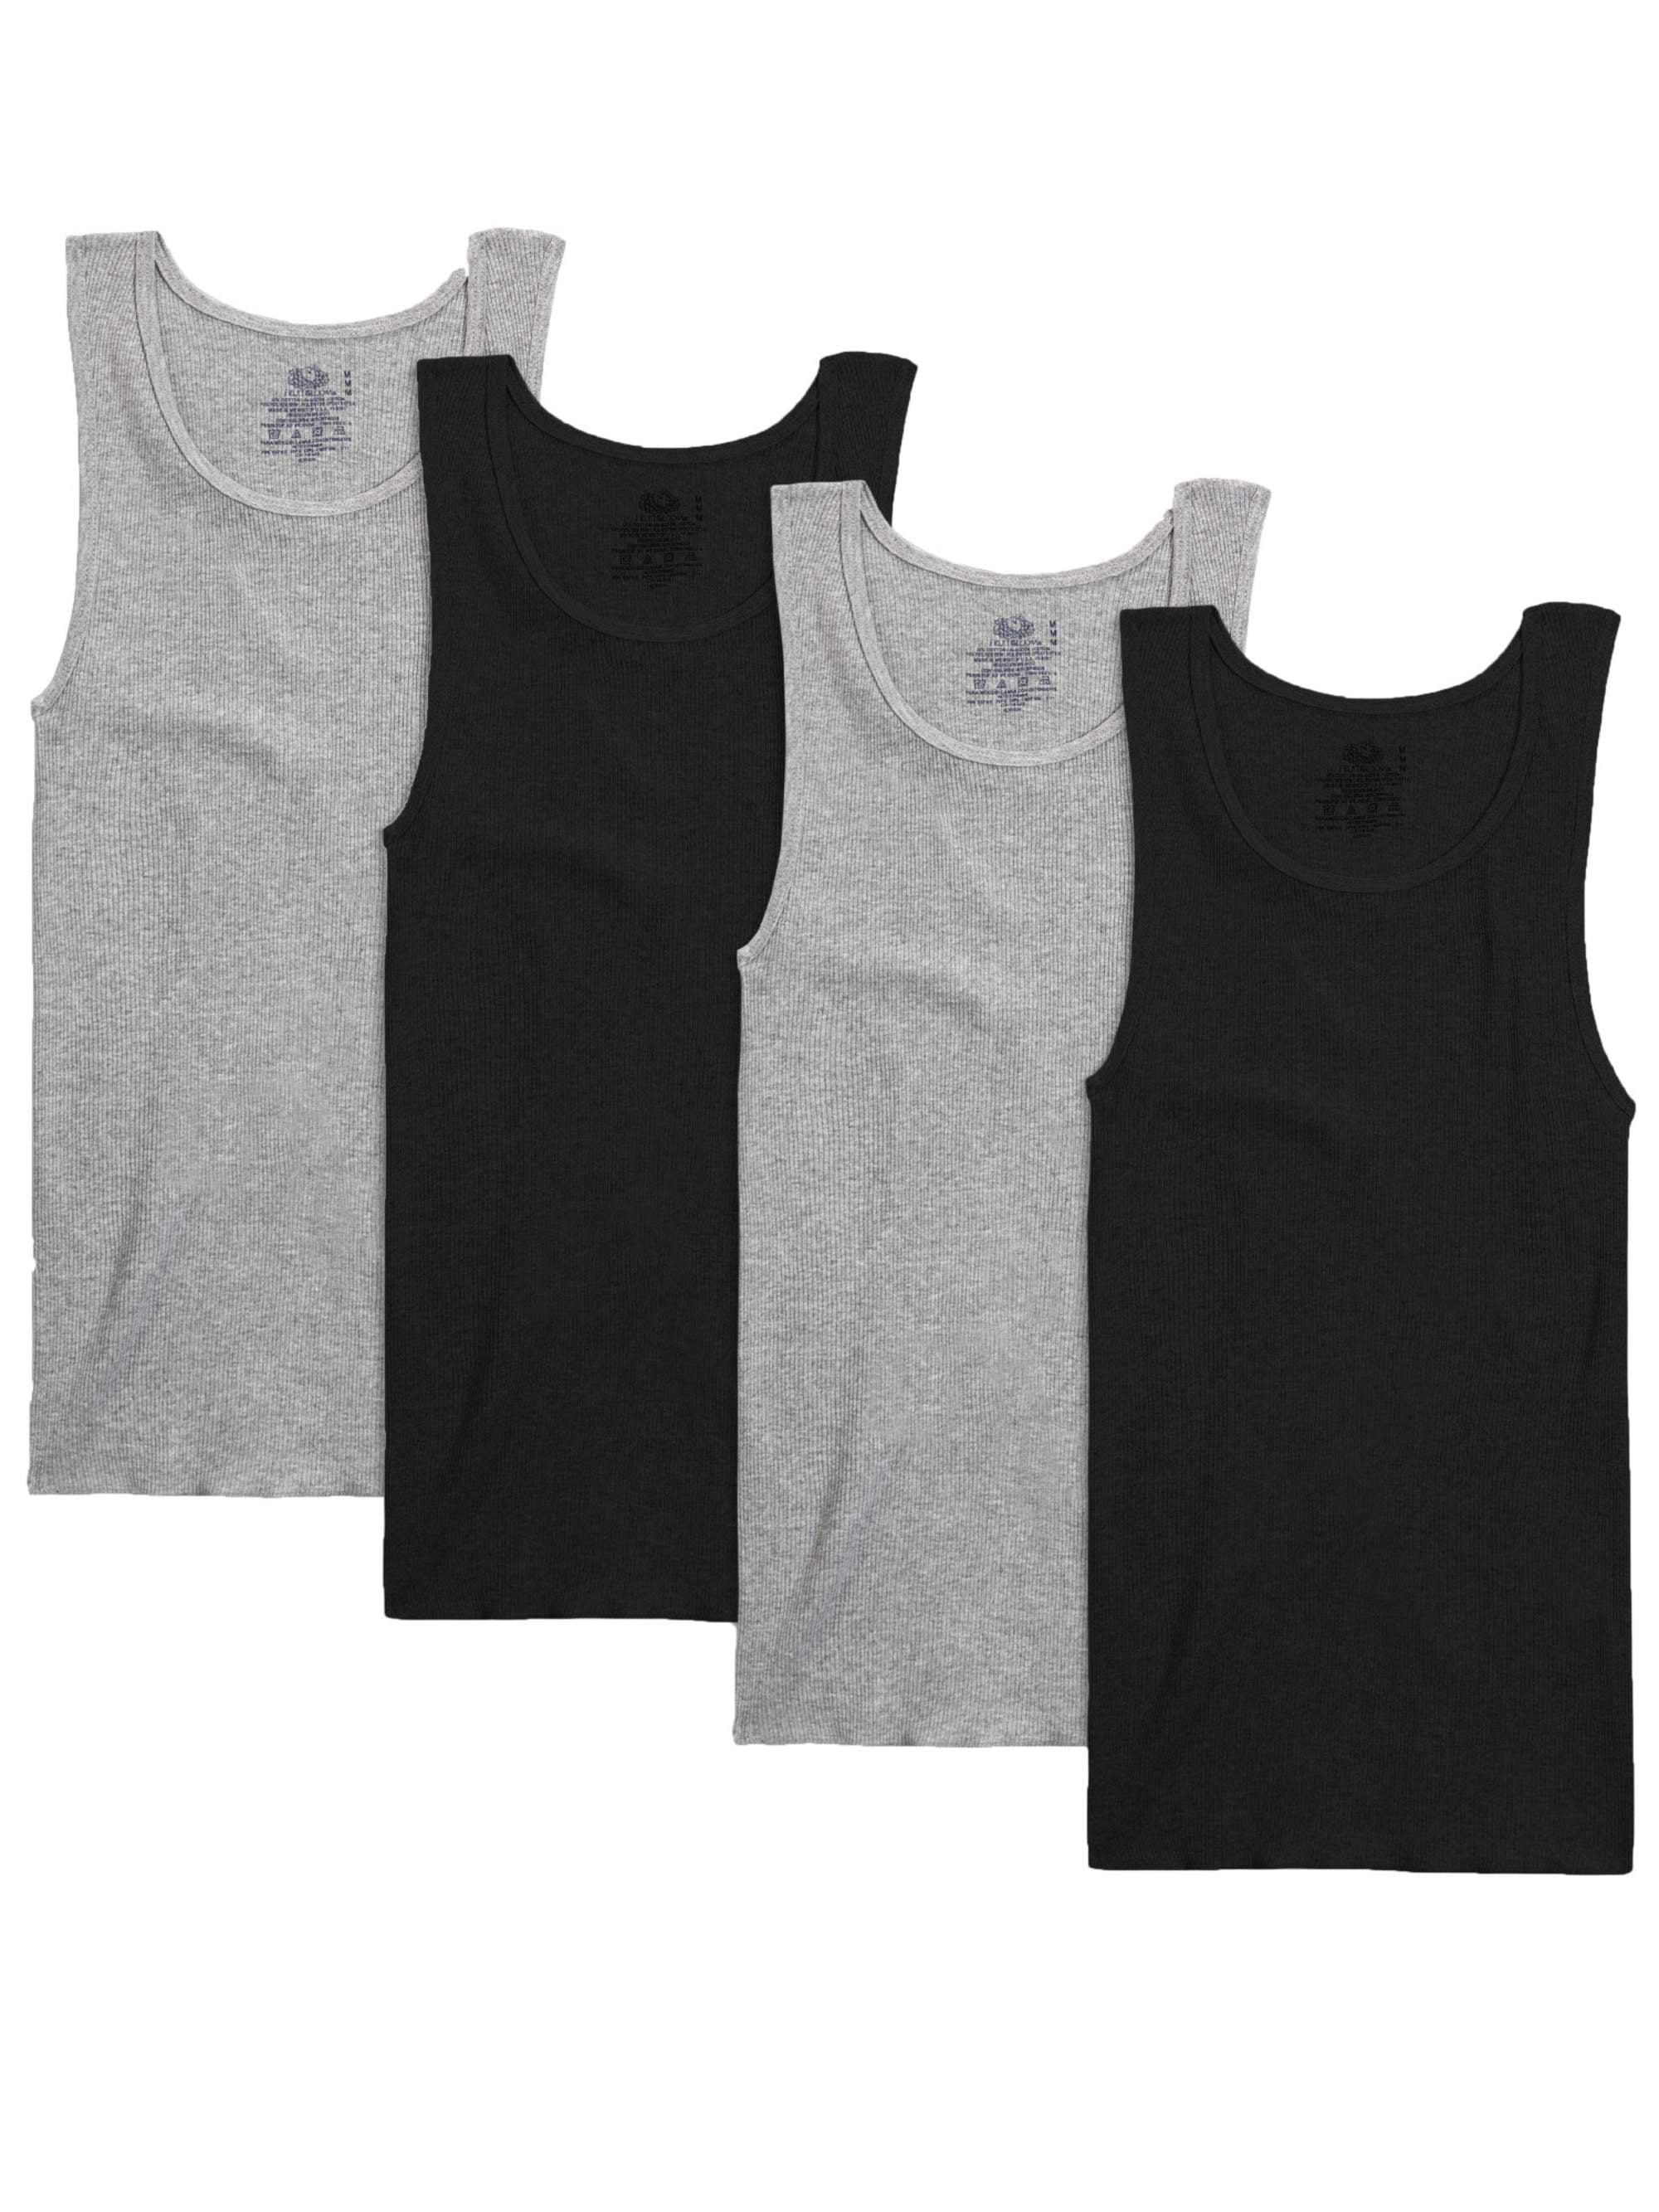 Fruit of the Loom Men's Black and Gray Tank A-Shirts, 4 Pack - Walmart.com